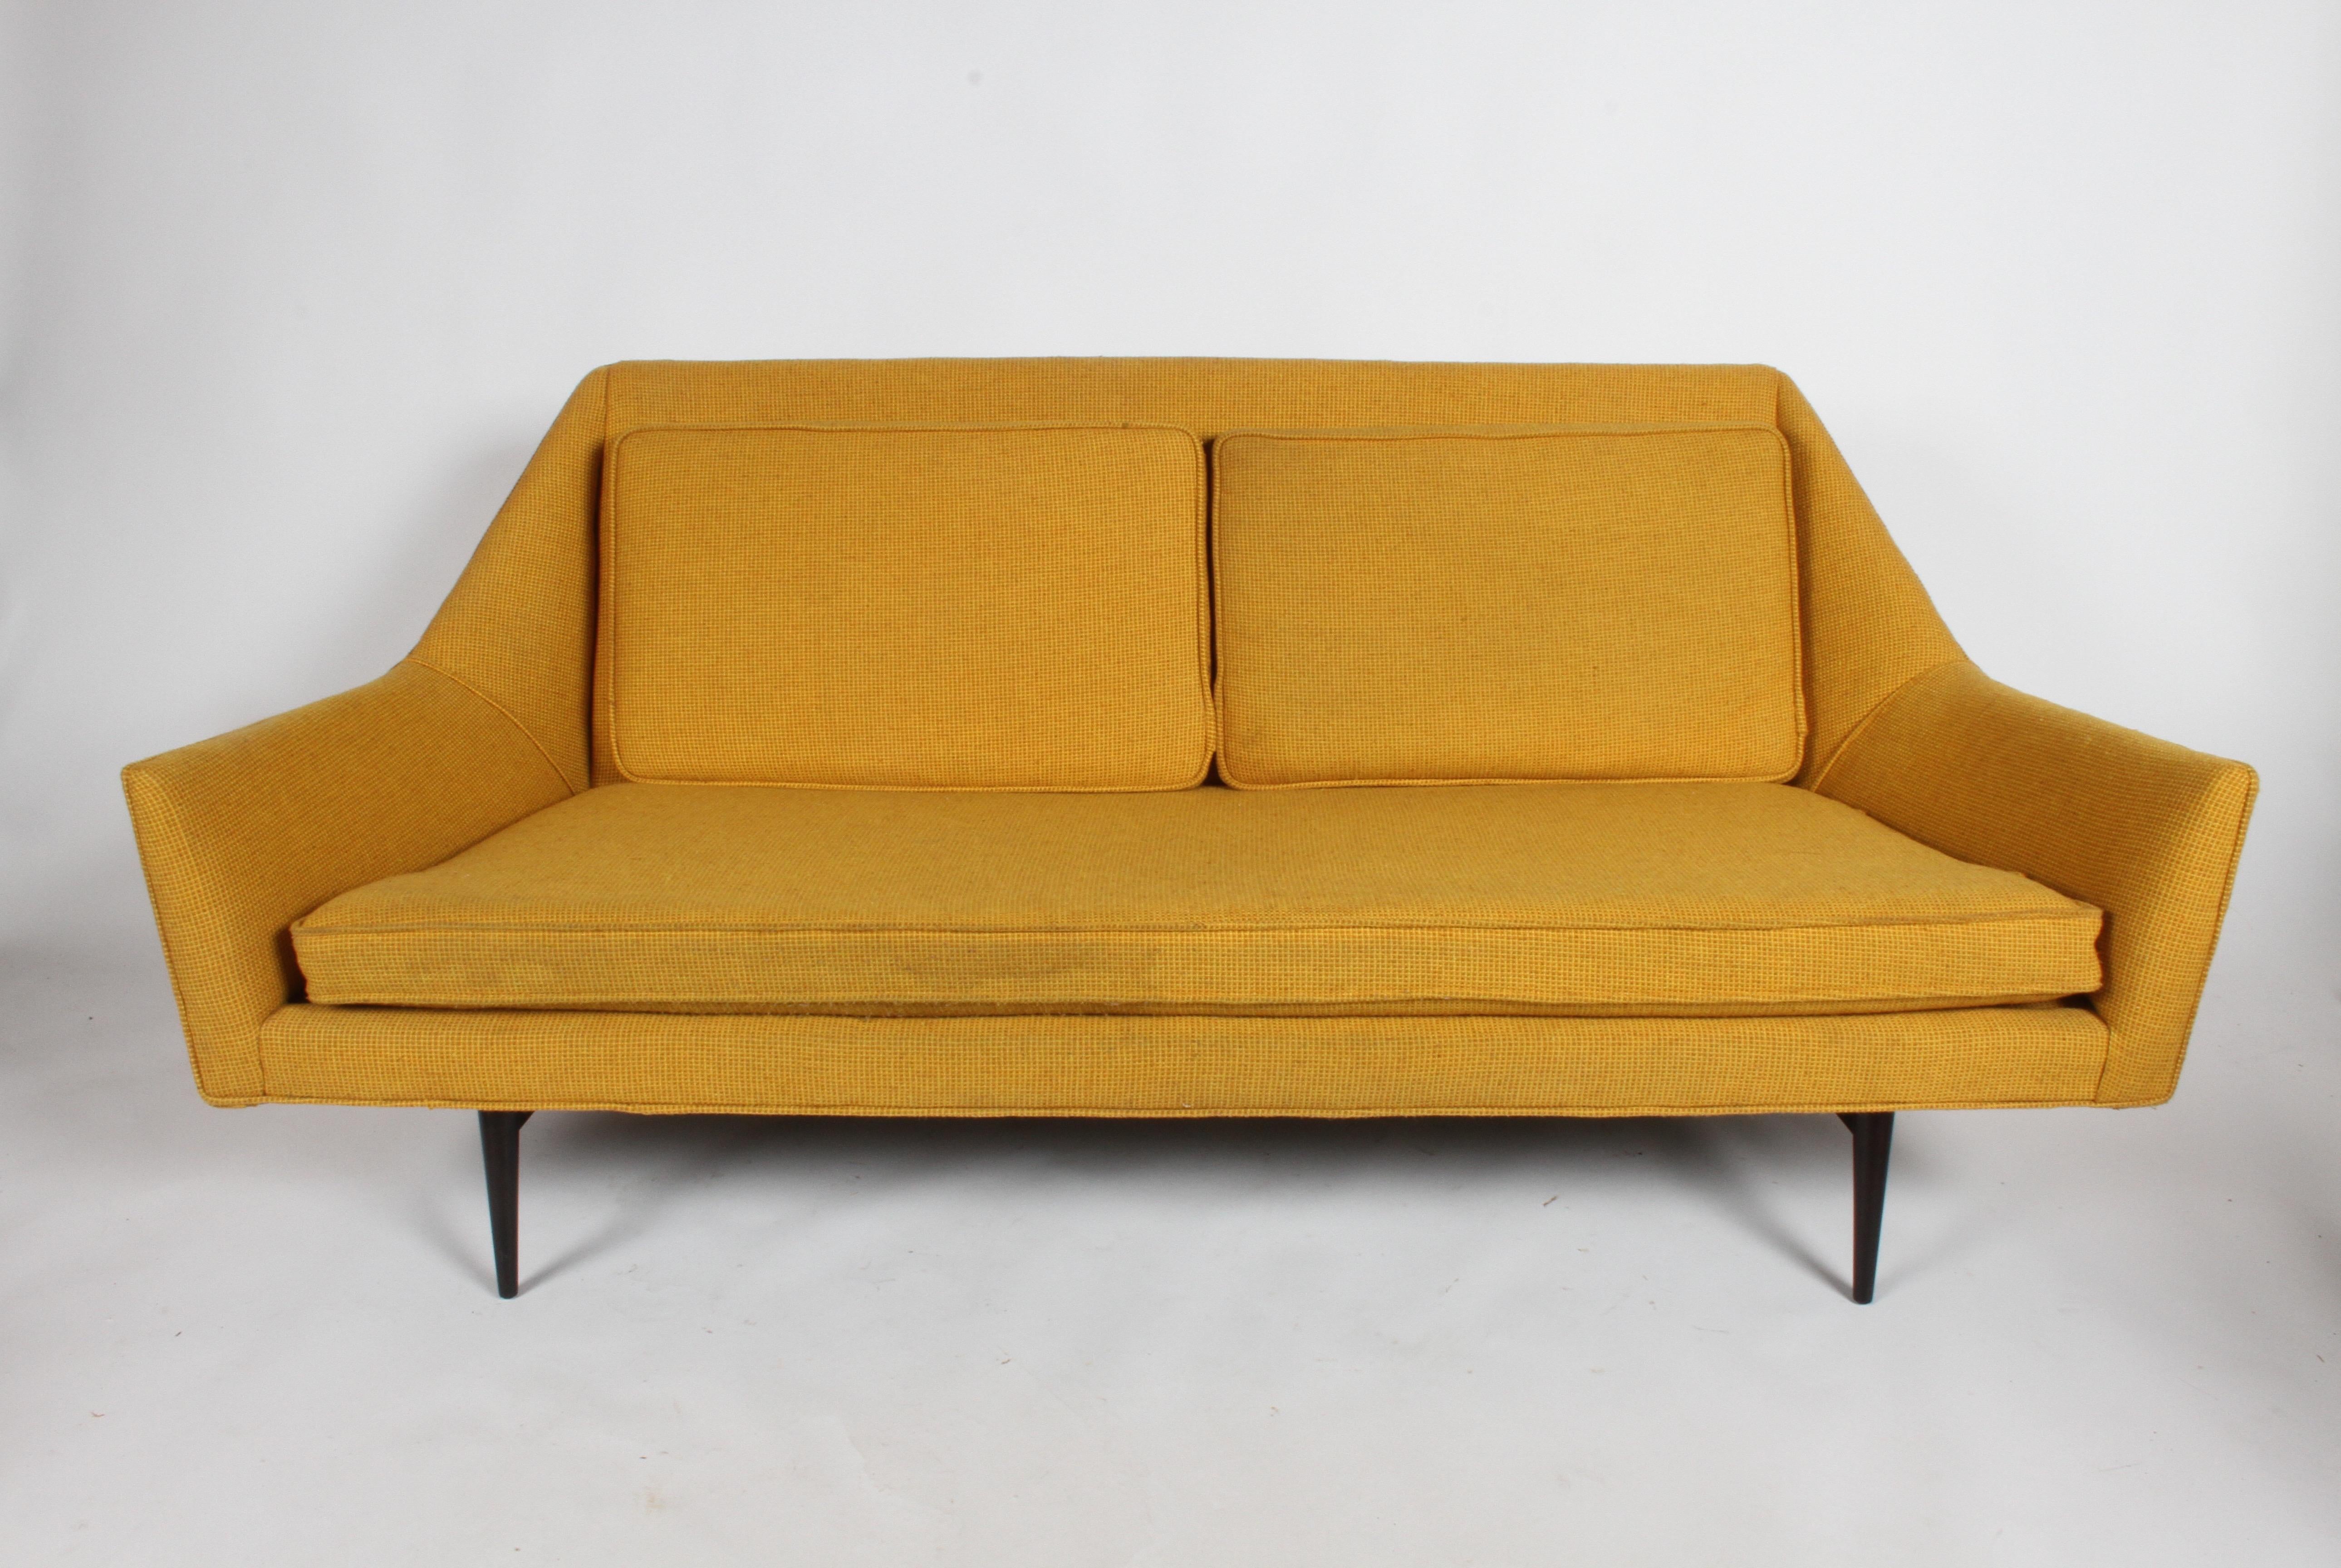 Rare Paul McCobb for Directional sculptural cubist sofa or settee. Legs have been refinished, older reupholstery and foam must be updated. Great sleek geometric lines on this sofa, a rarely seen form. Email for a quote on reupholstery. 

Measures: